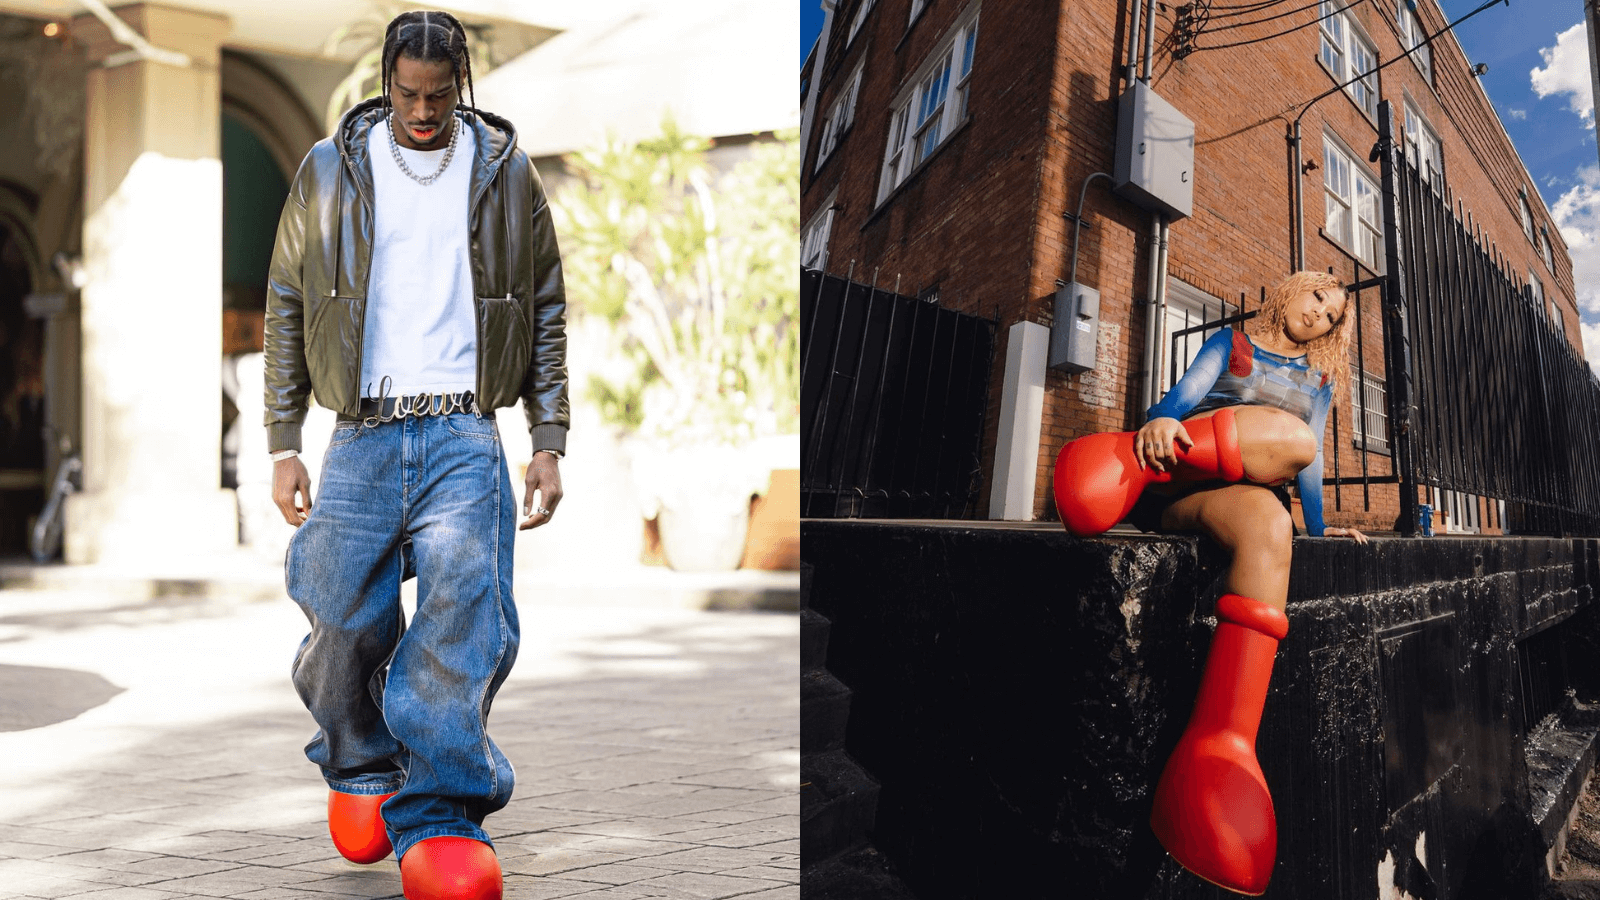 The viral red boots everyone is talking about: 'Cartoon boots for